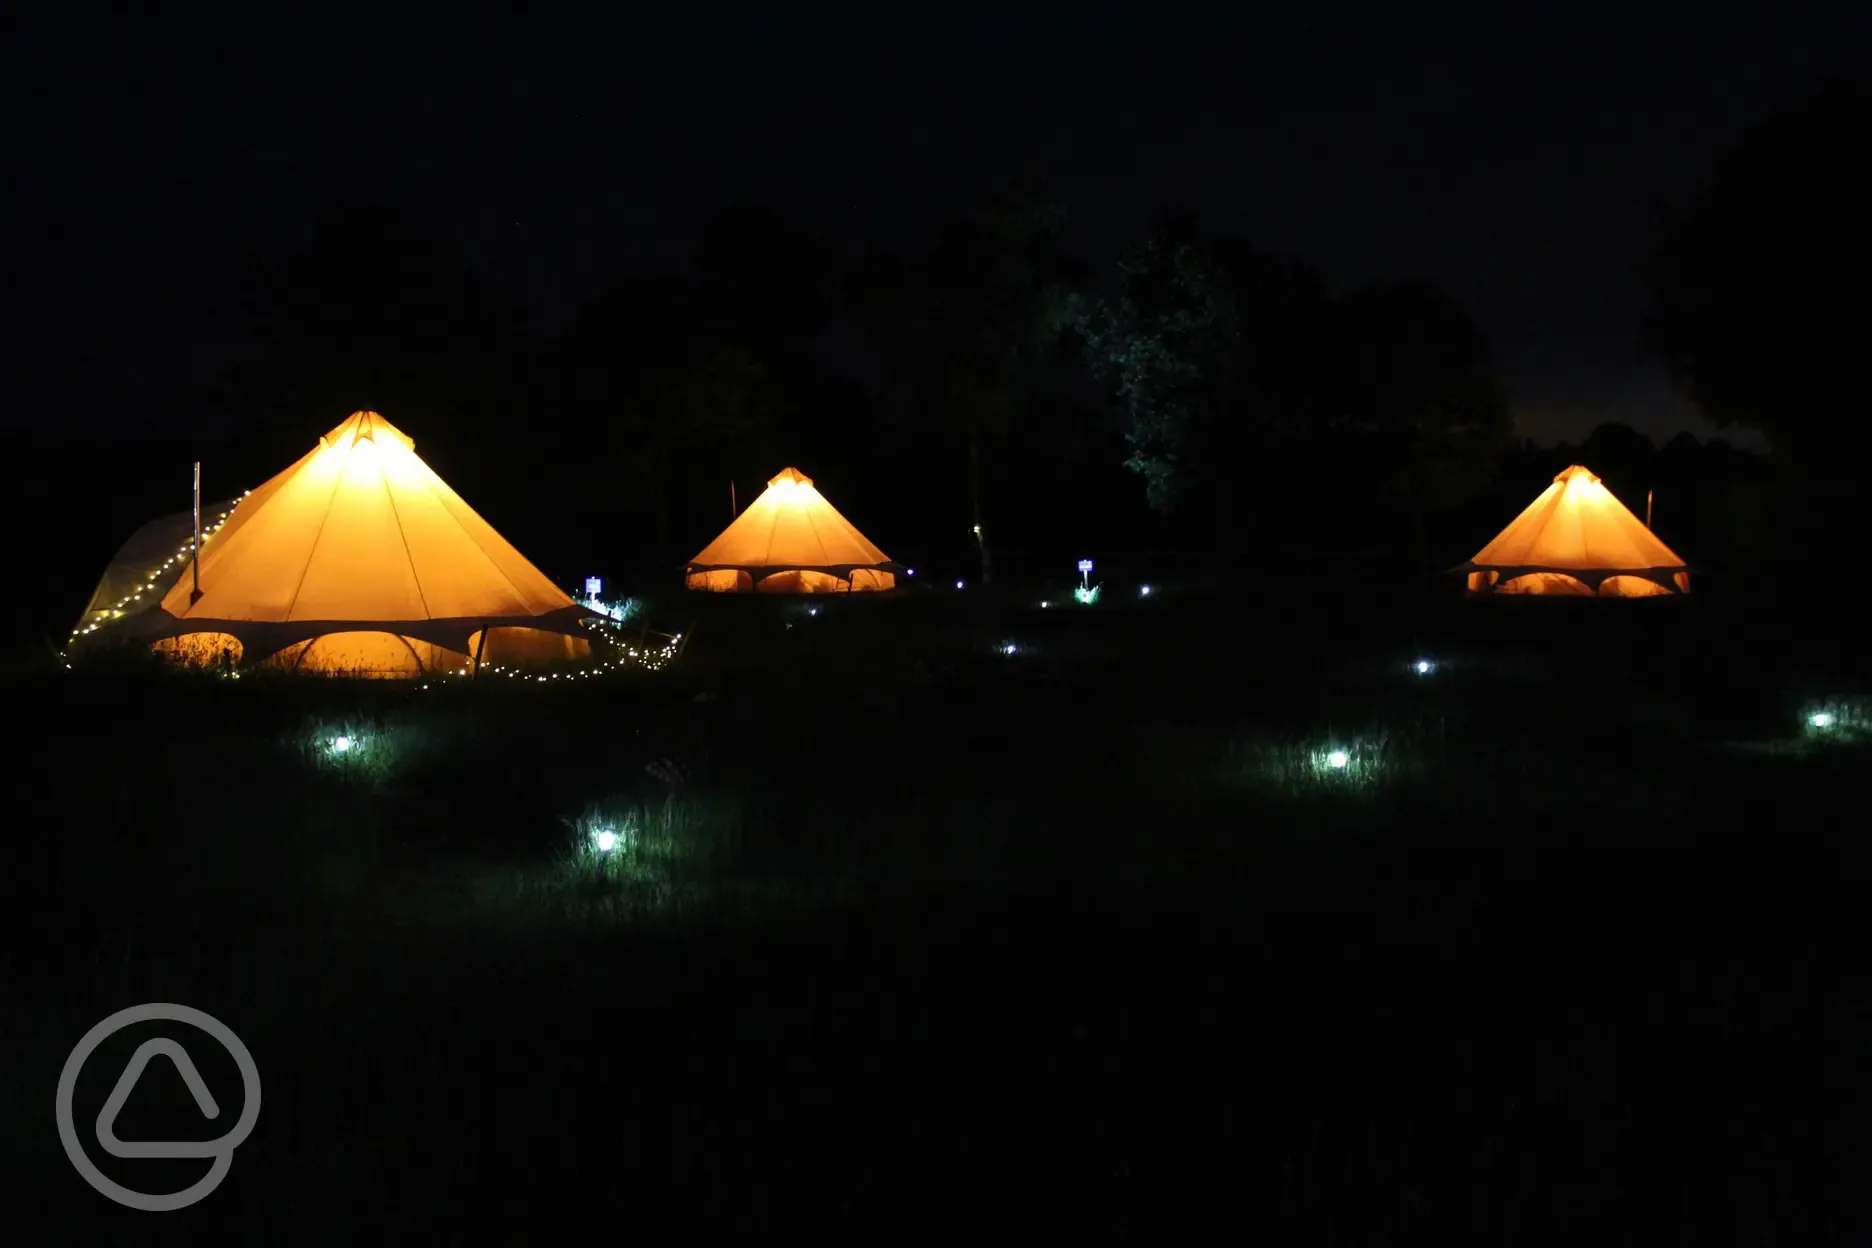 Night view of the tents